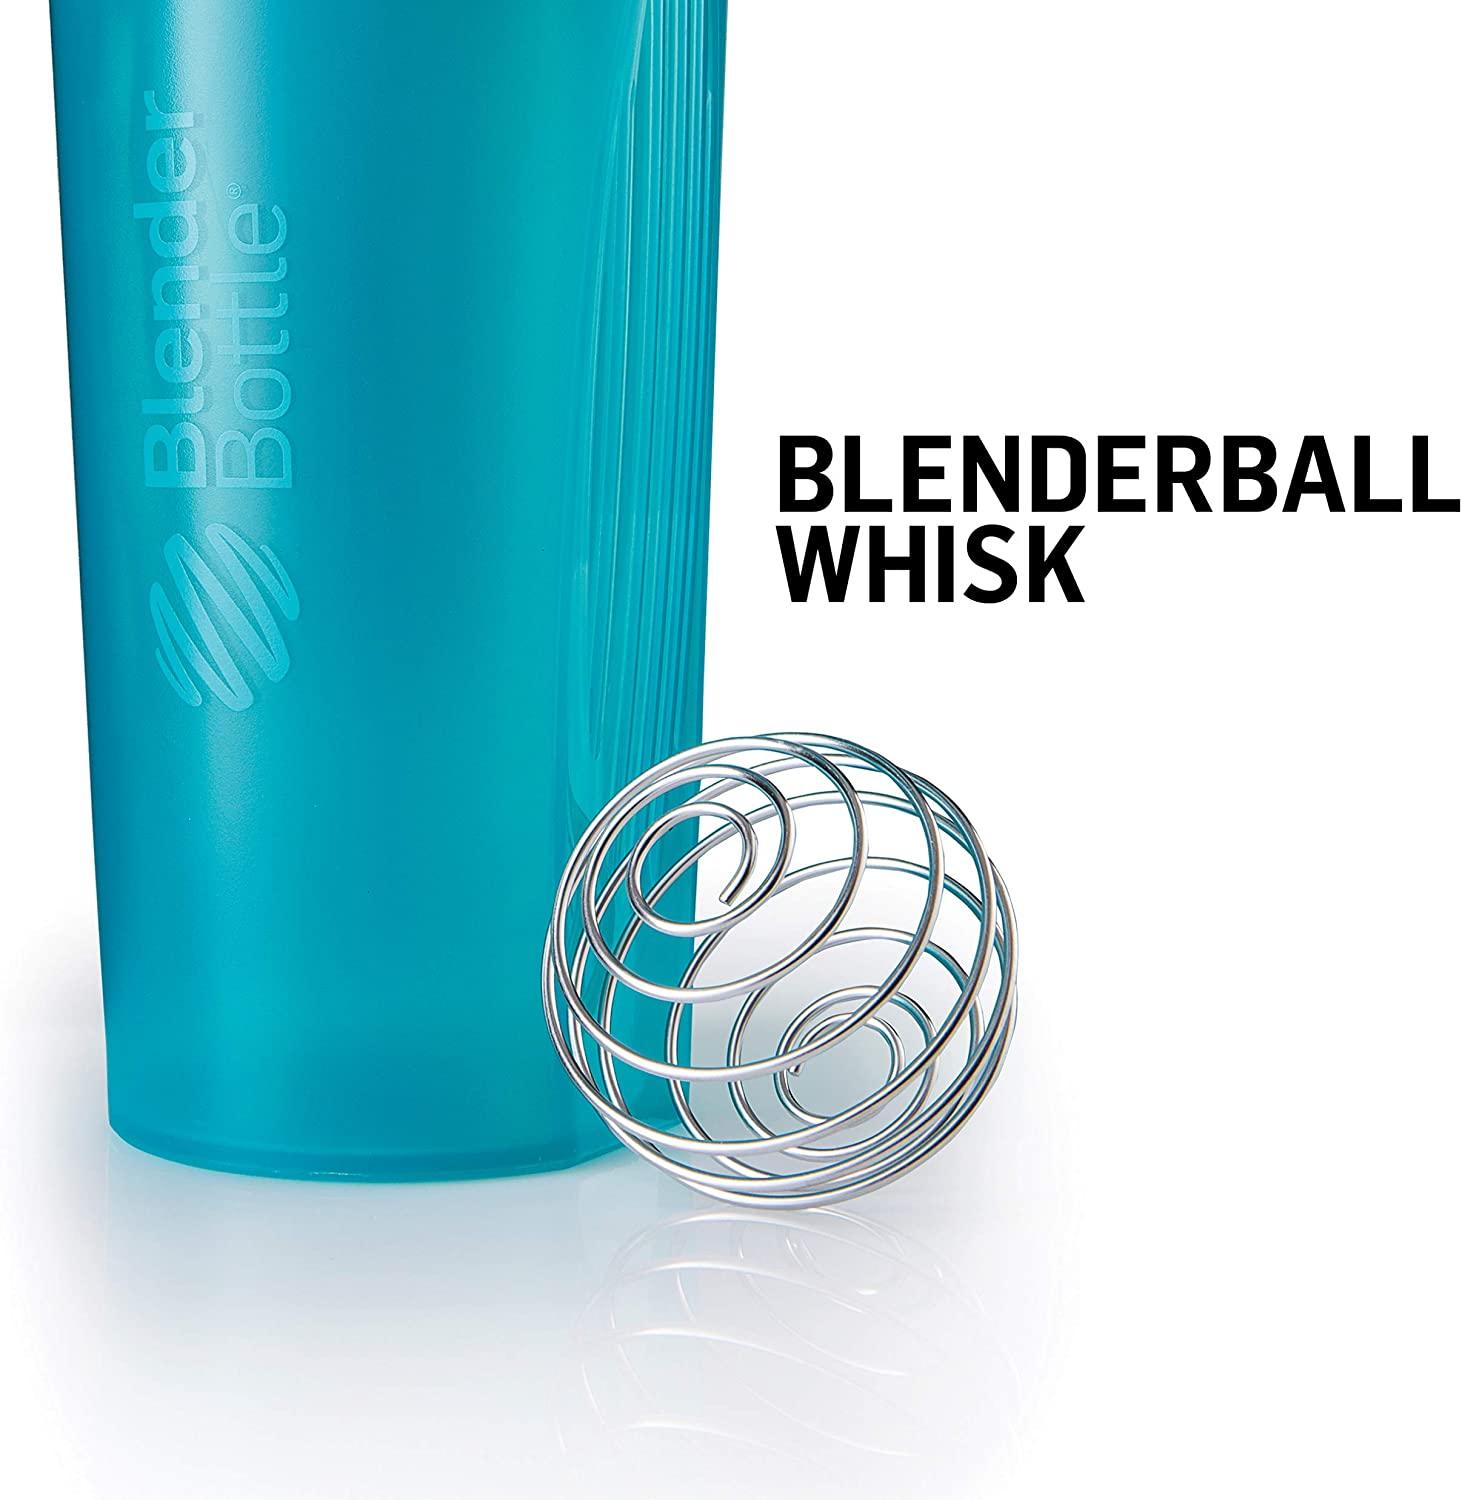 Blender Bottle BlenderBottle Classic Shaker Bottle Perfect for Protein  Shakes and Pre Workout, 20-Ounce (3 Pack), Clear/Black and Black and Pebble  Grey Clear/Black and Black and Pebble Grey Shaker Bottle